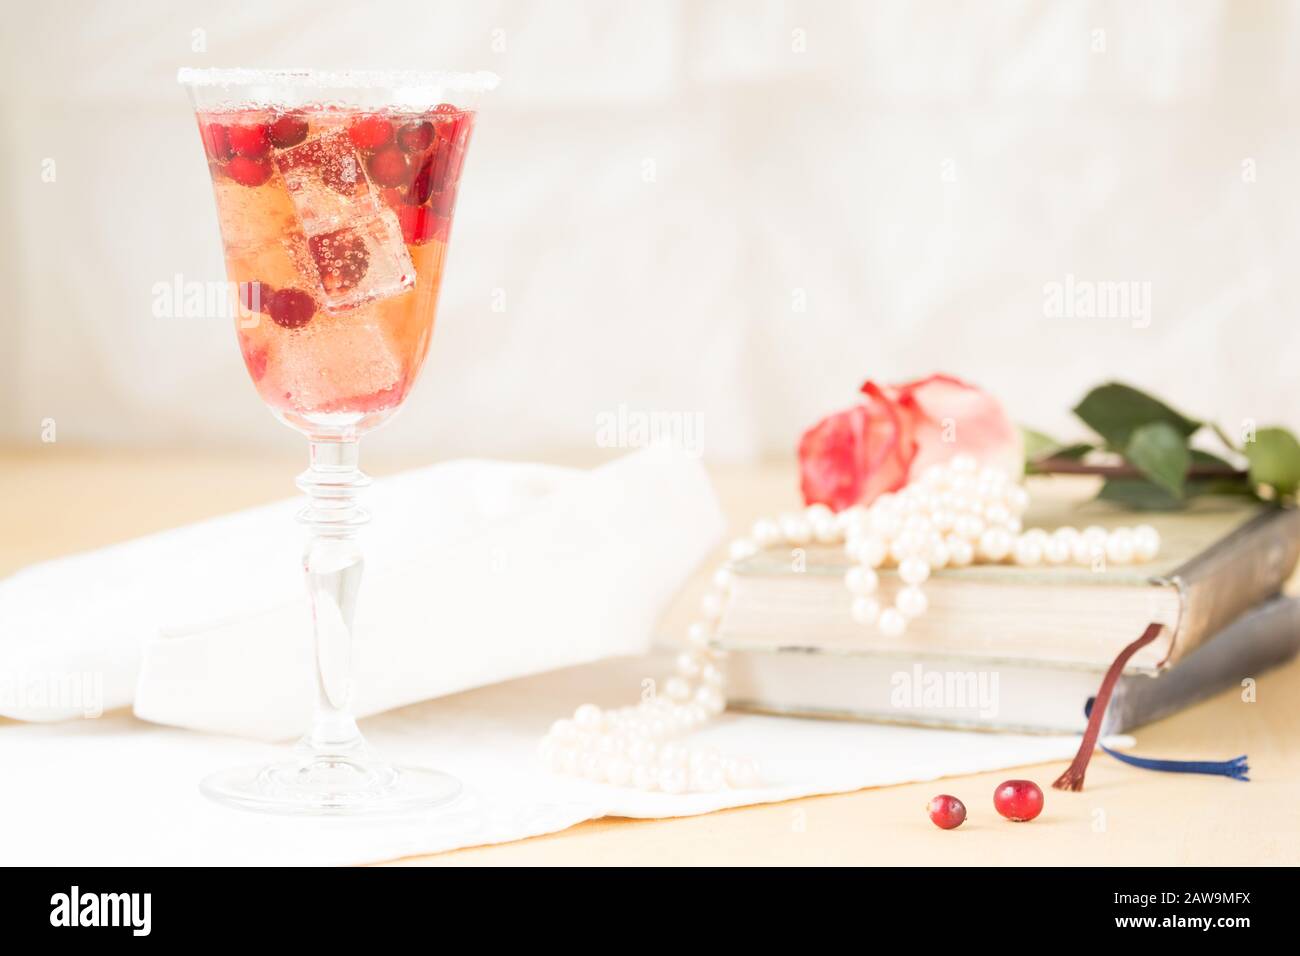 Glass of champagne and cranberry cocktail with vintage books and pearls. Lightweight background. Vintage style. Horizontal Stock Photo